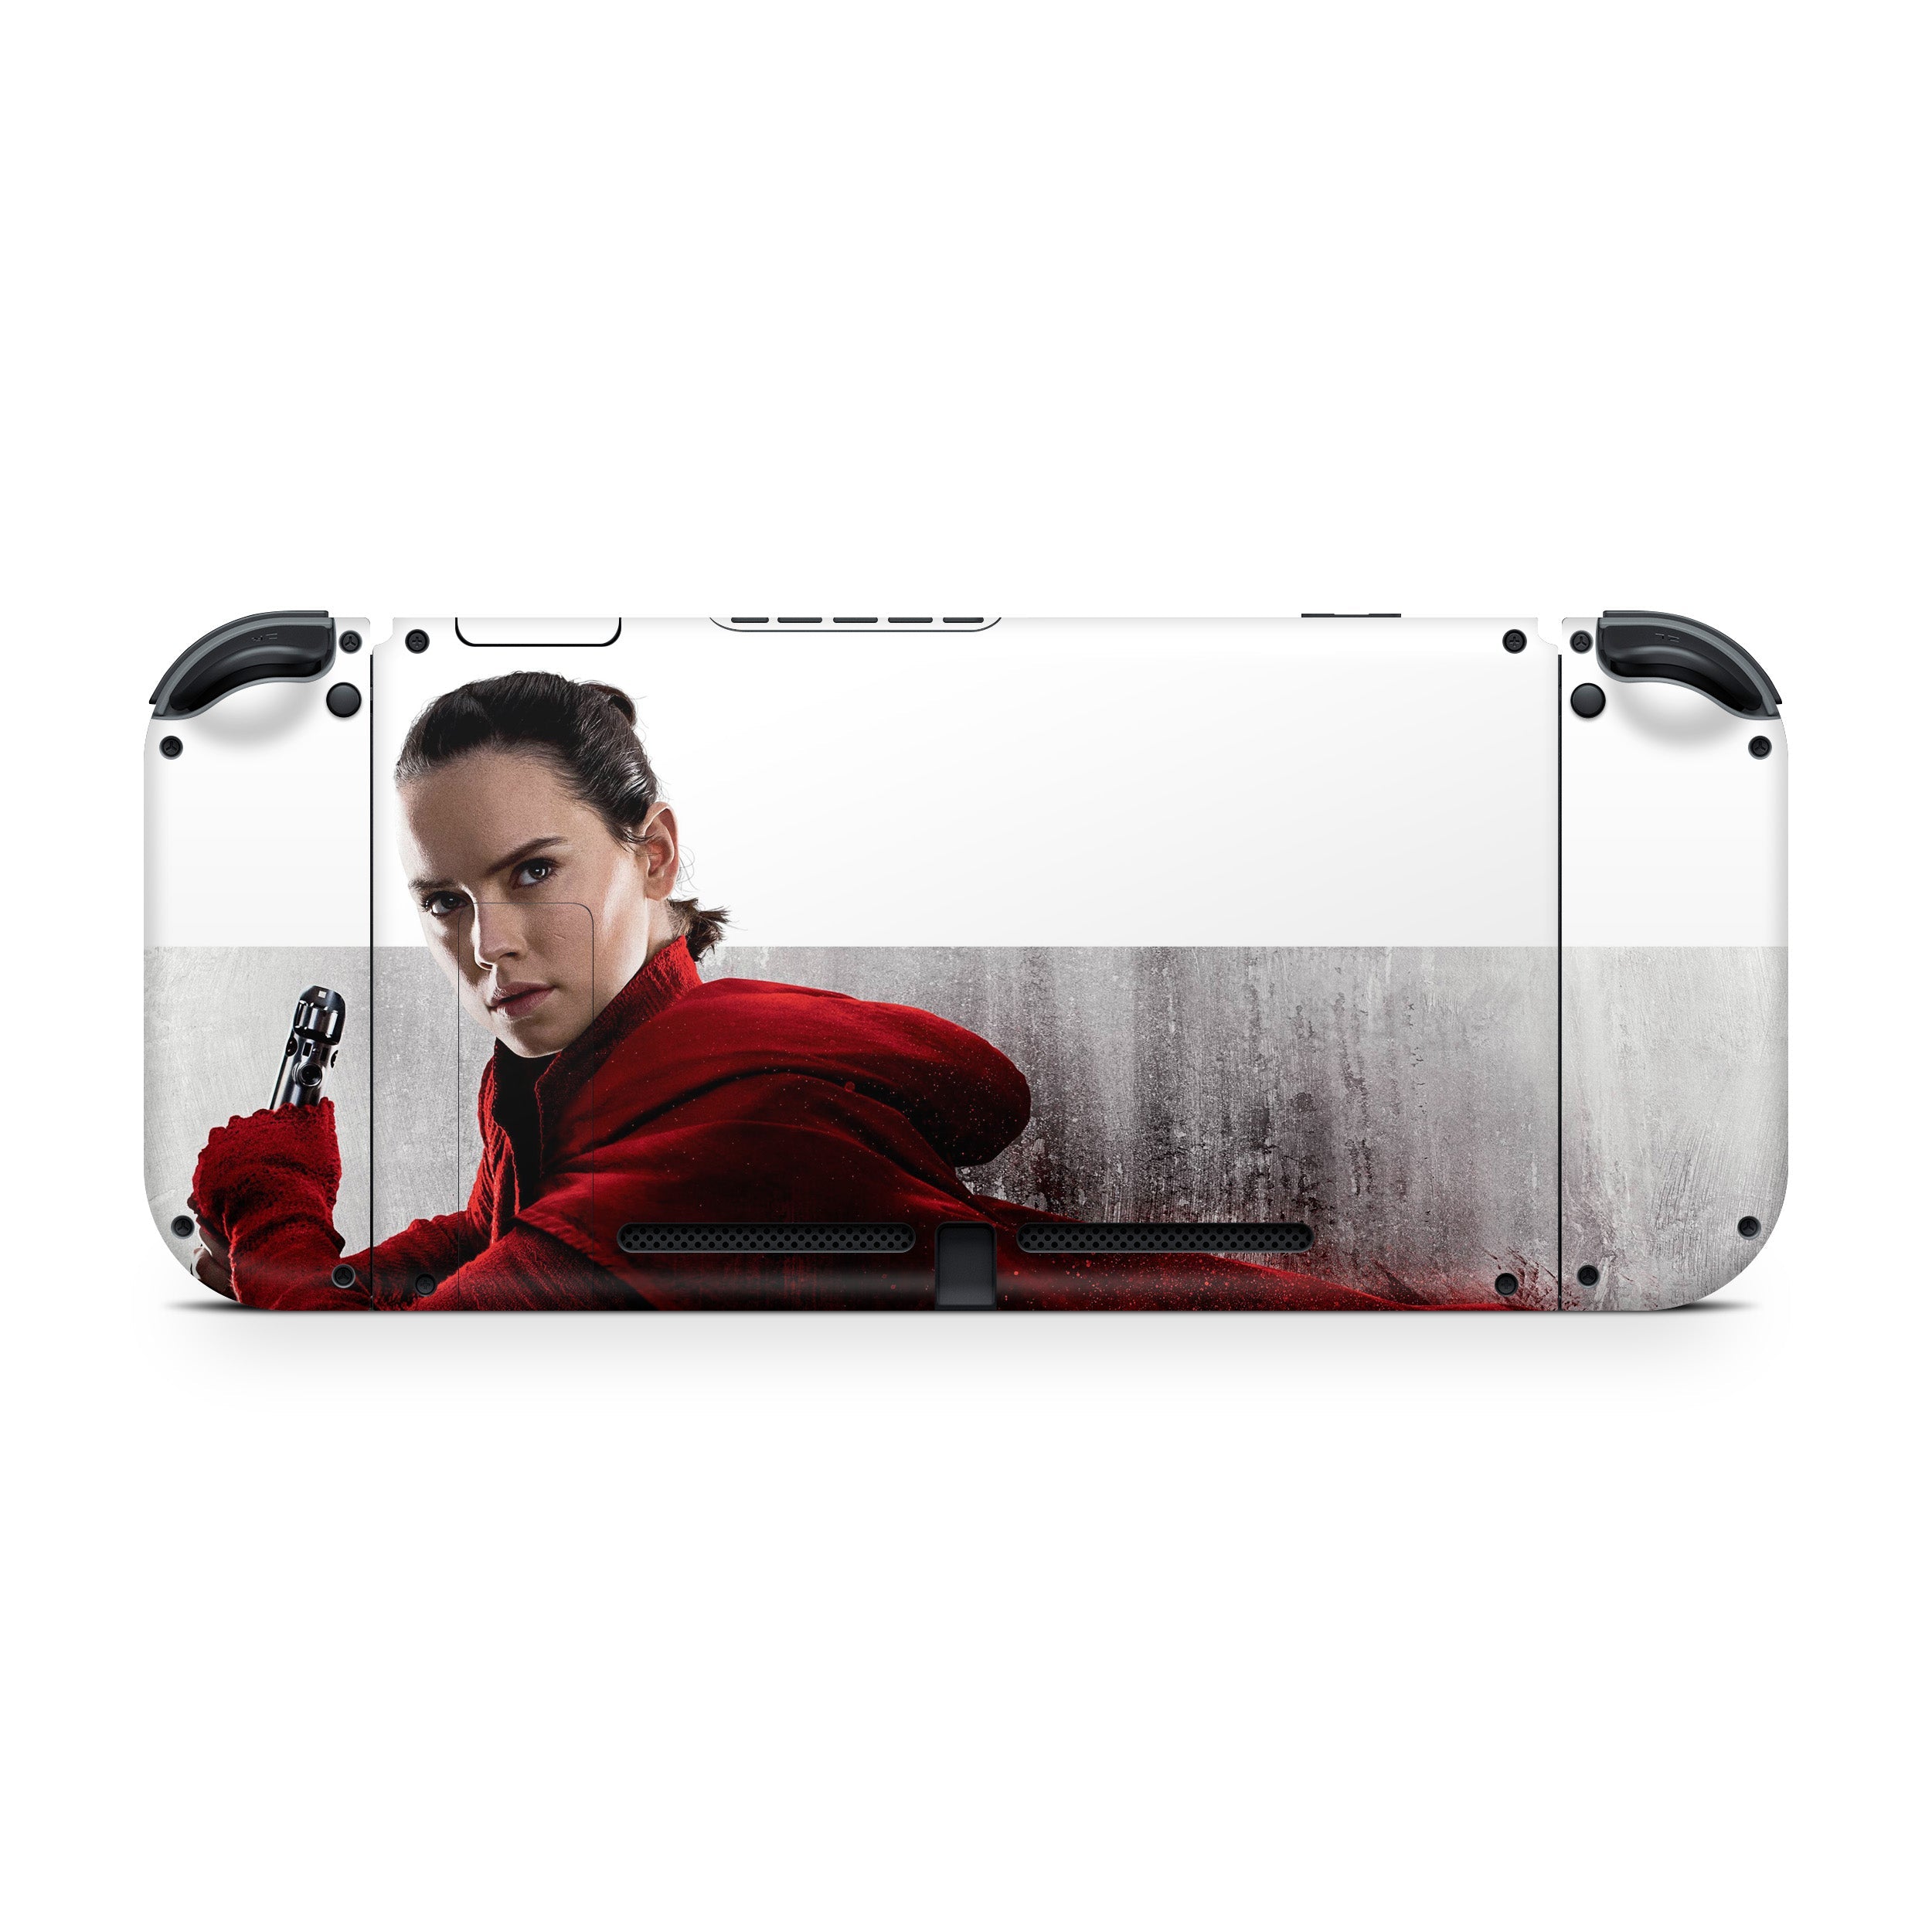 A video game skin featuring a Star Wars Rey design for the Nintendo Switch.